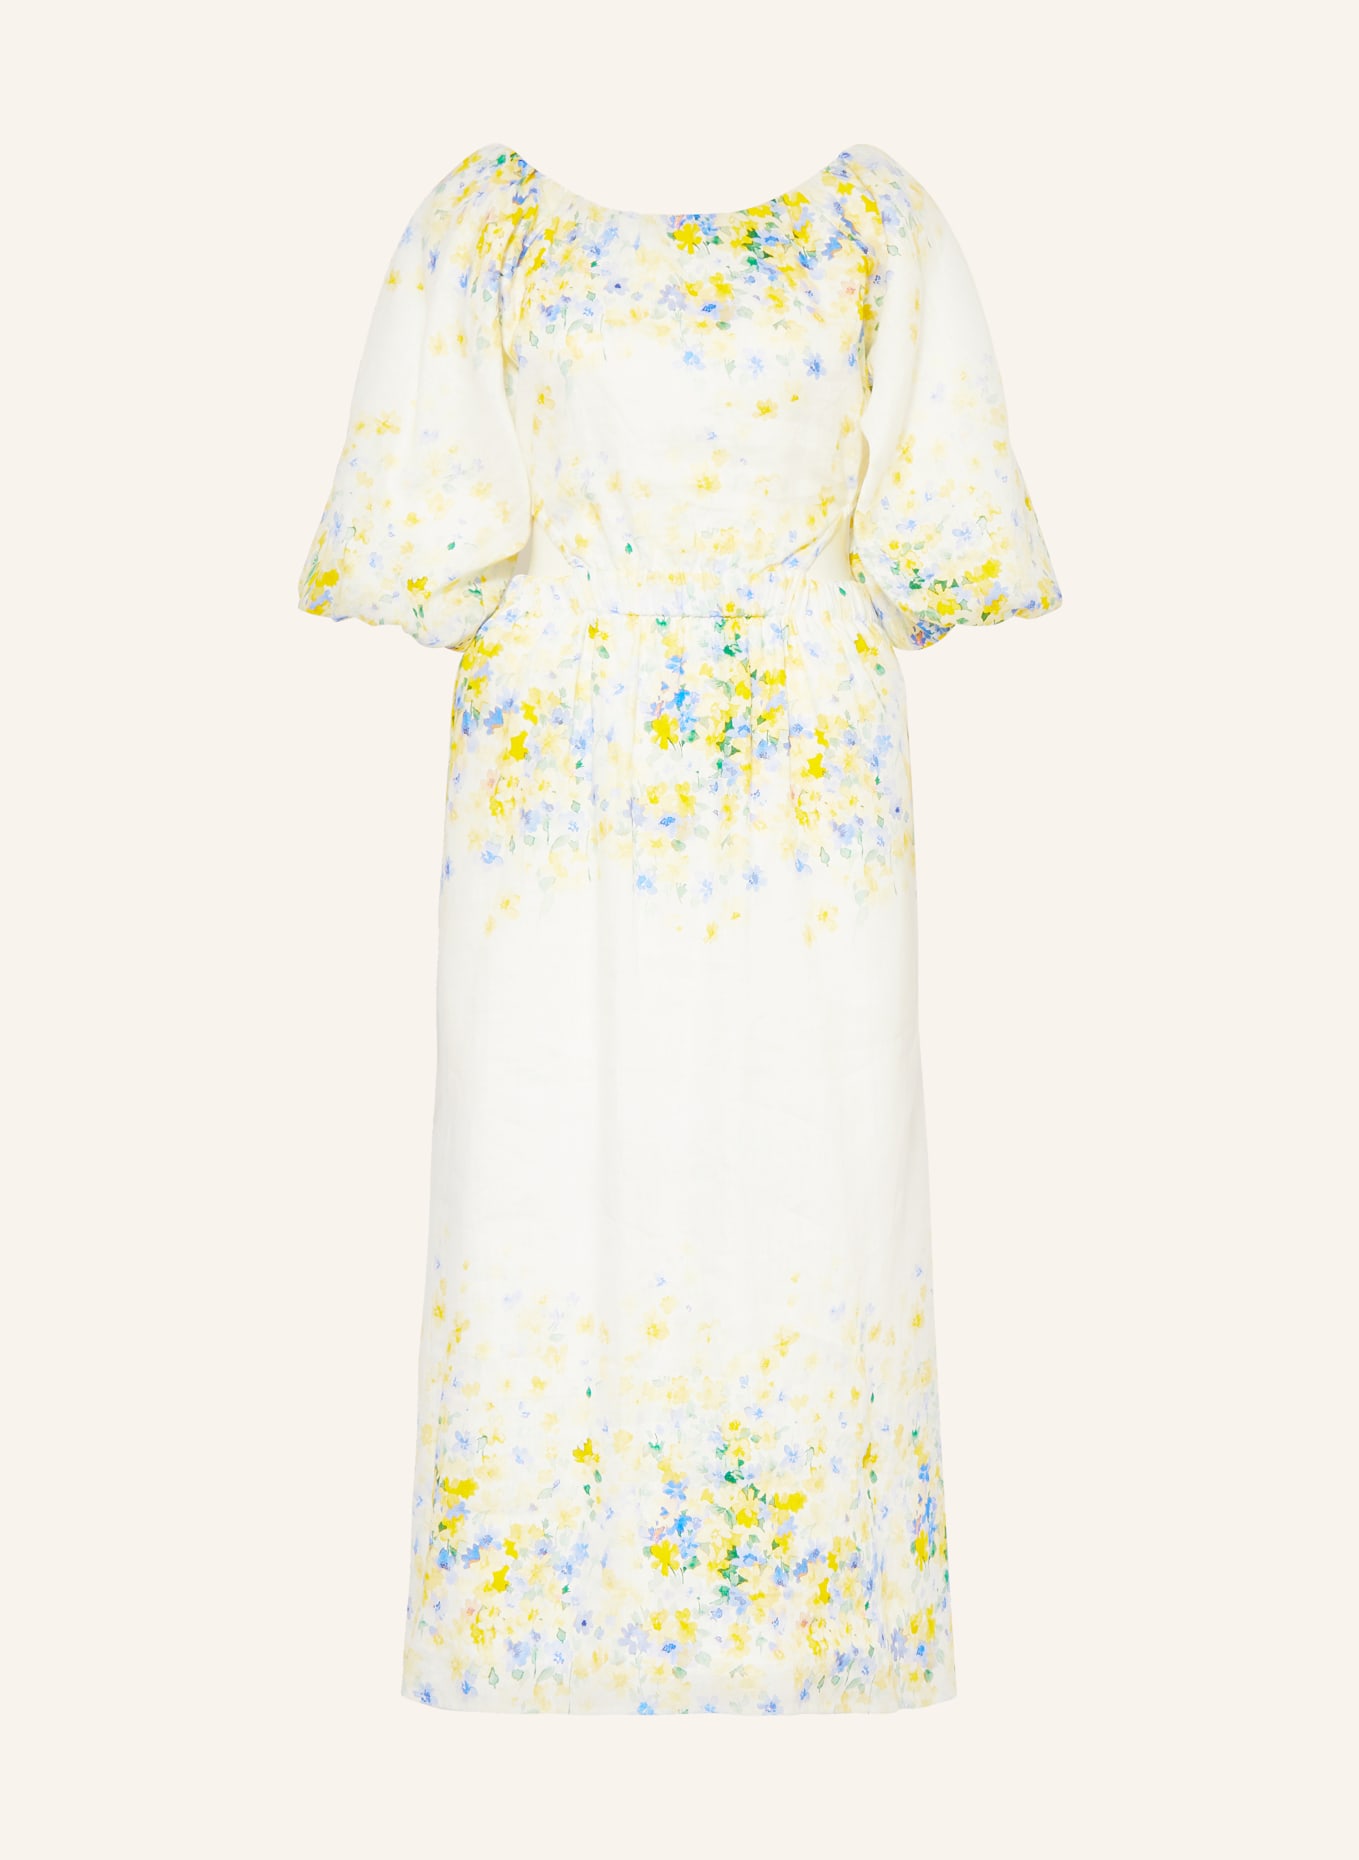 MRS & HUGS Linen dress with cut-out, Color: WHITE/ YELLOW/ BLUE (Image 1)